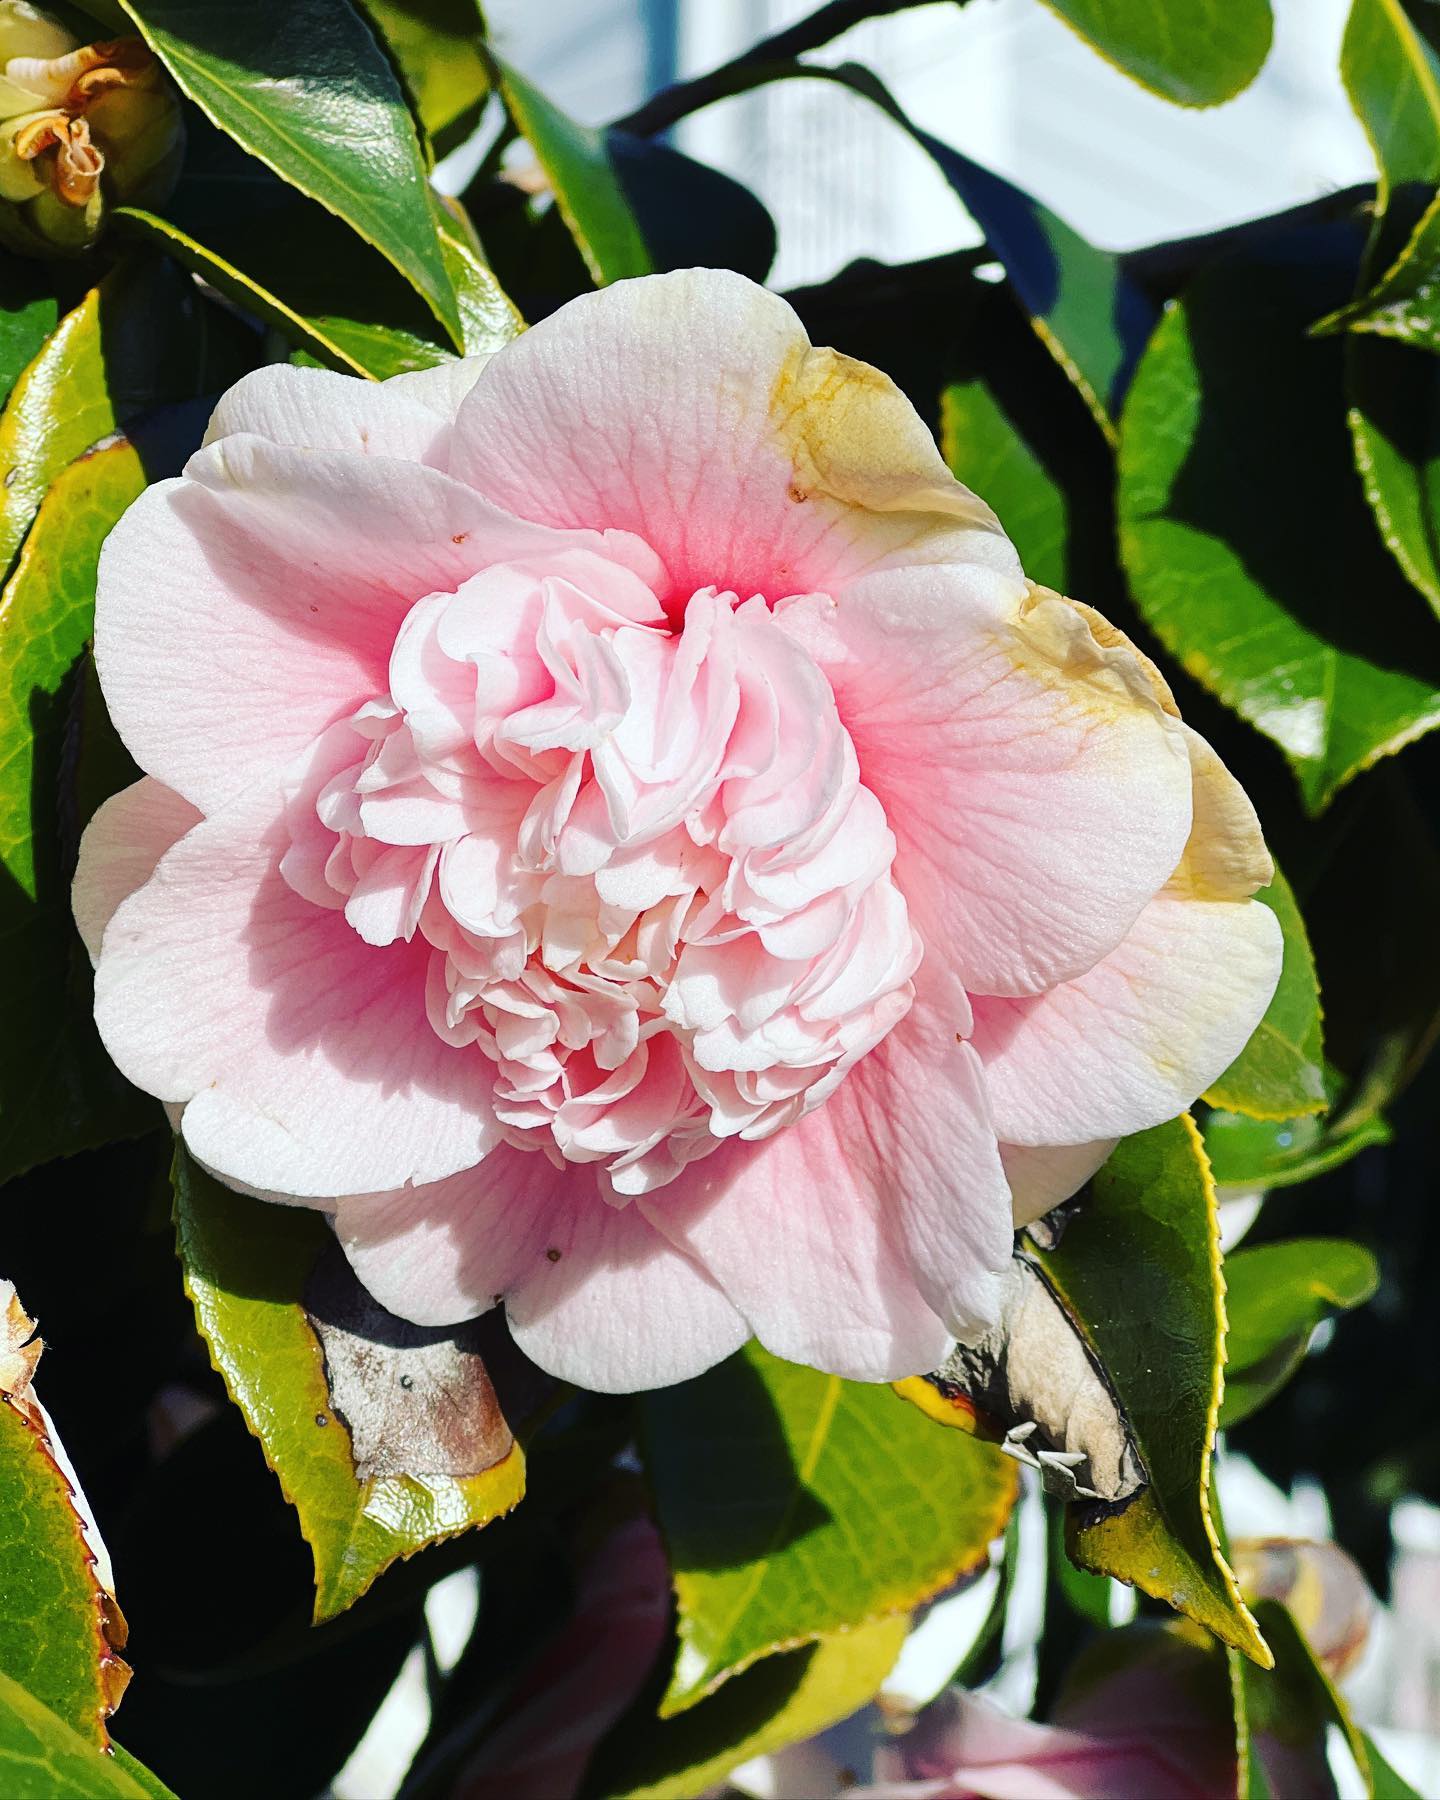 Pictures from my January adventures!  Camellia seen on Alameda @loveourisland yesterday.   Tide coming up over the Embarcadero last weekend for #kingtide at a talk by @kqed My granny turned 100! Sad I couldn’t be there. But wow! A hundred #100yearoldgranny My bff came to visit and we did silly things @gregoryadamson Cable car early in the morning going down Powell Street. #sf #cablecarWeird graffiti I saw in the Mission #graffiti And a lovely bouquet by @nineswordsdesign seen in a bakery. #bouquetAnd finally me hugging a rabbit 🐇 at @unionsquaresf for Chinese New Year 🧧